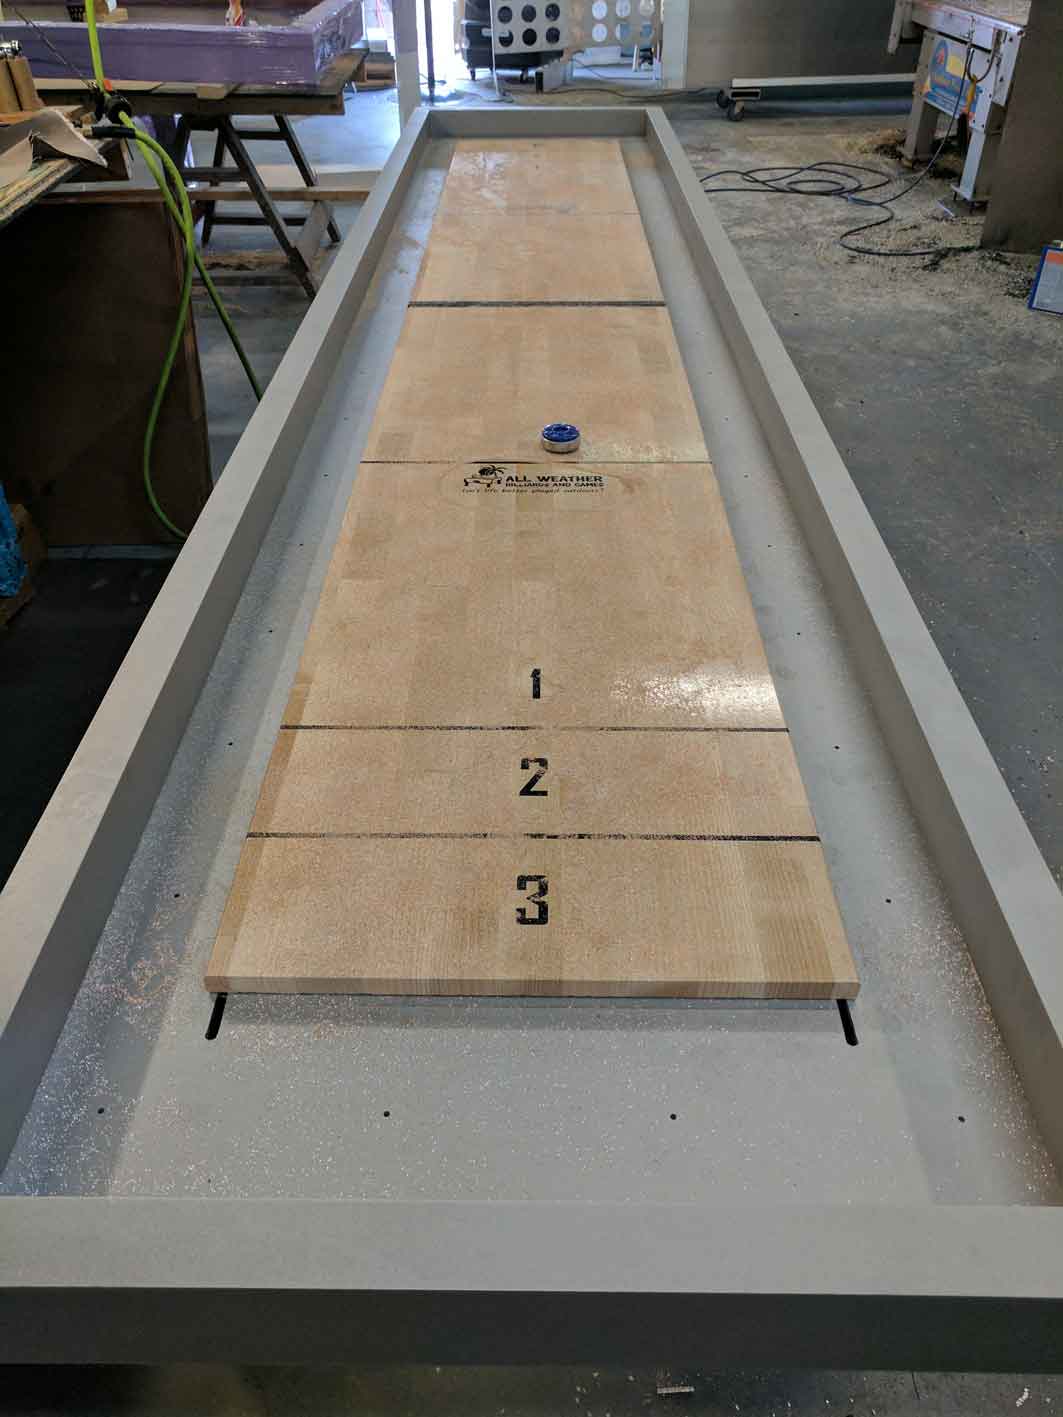 Top view of custom, outdoor shuffleboard game table by R&R Outdoors All Weather Billiards